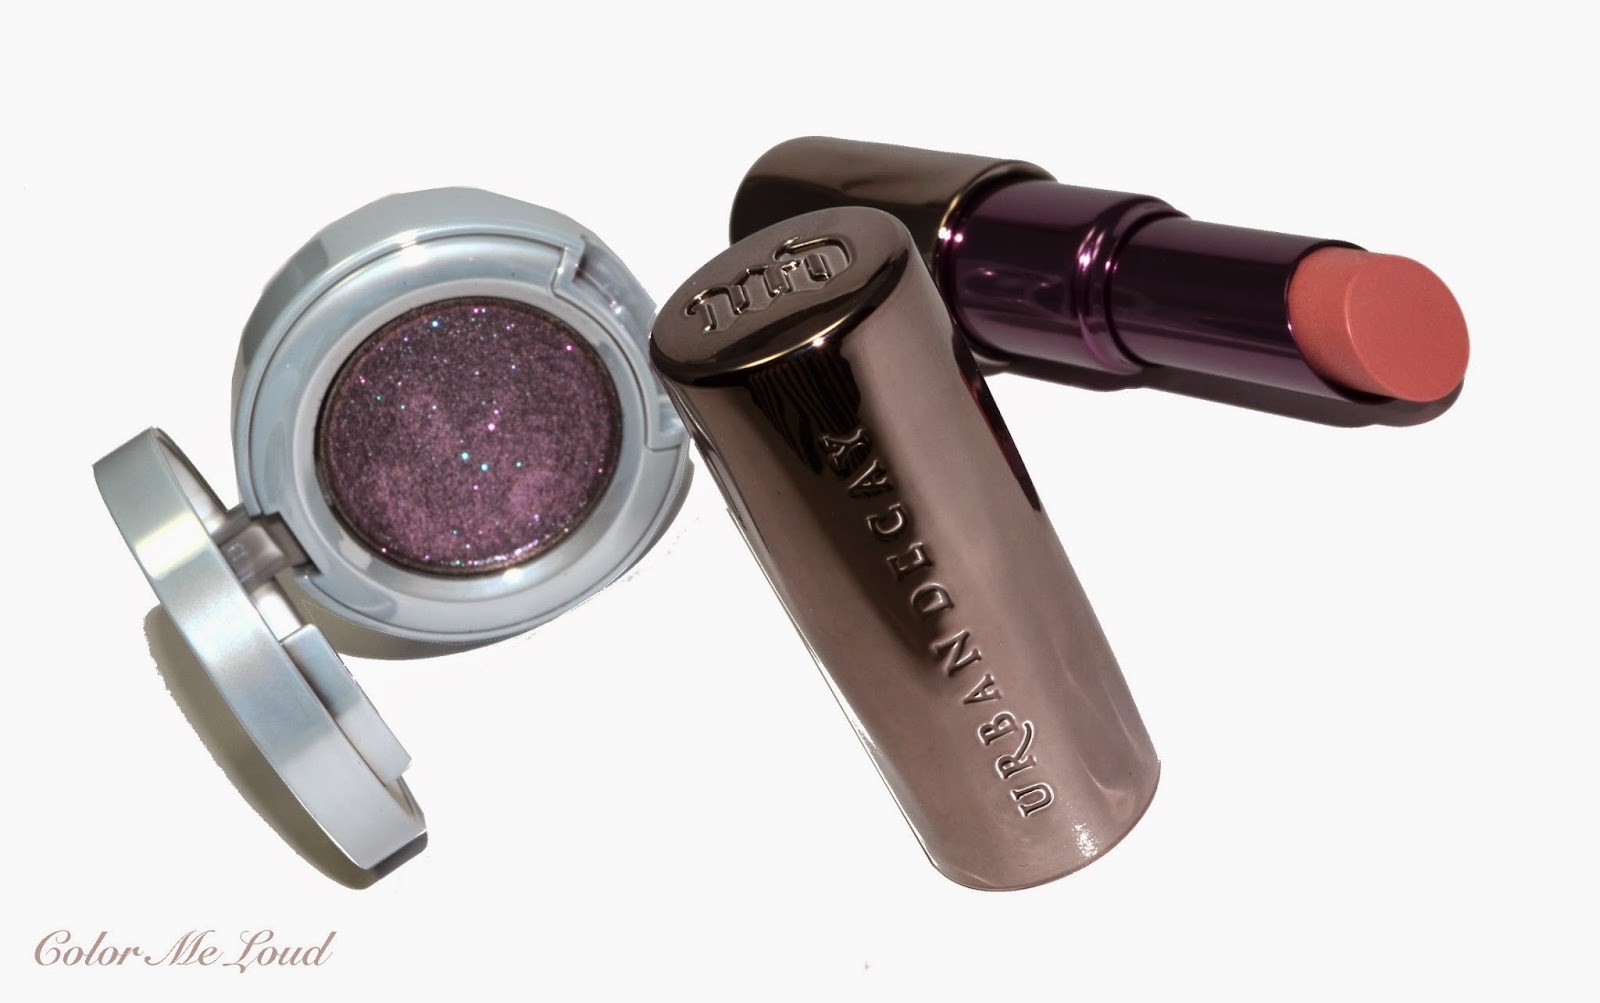 Urban Decay Moondust Eyeshadow in Ether, Revolution Lipstick in Naked, Review, Swatch & FOTD